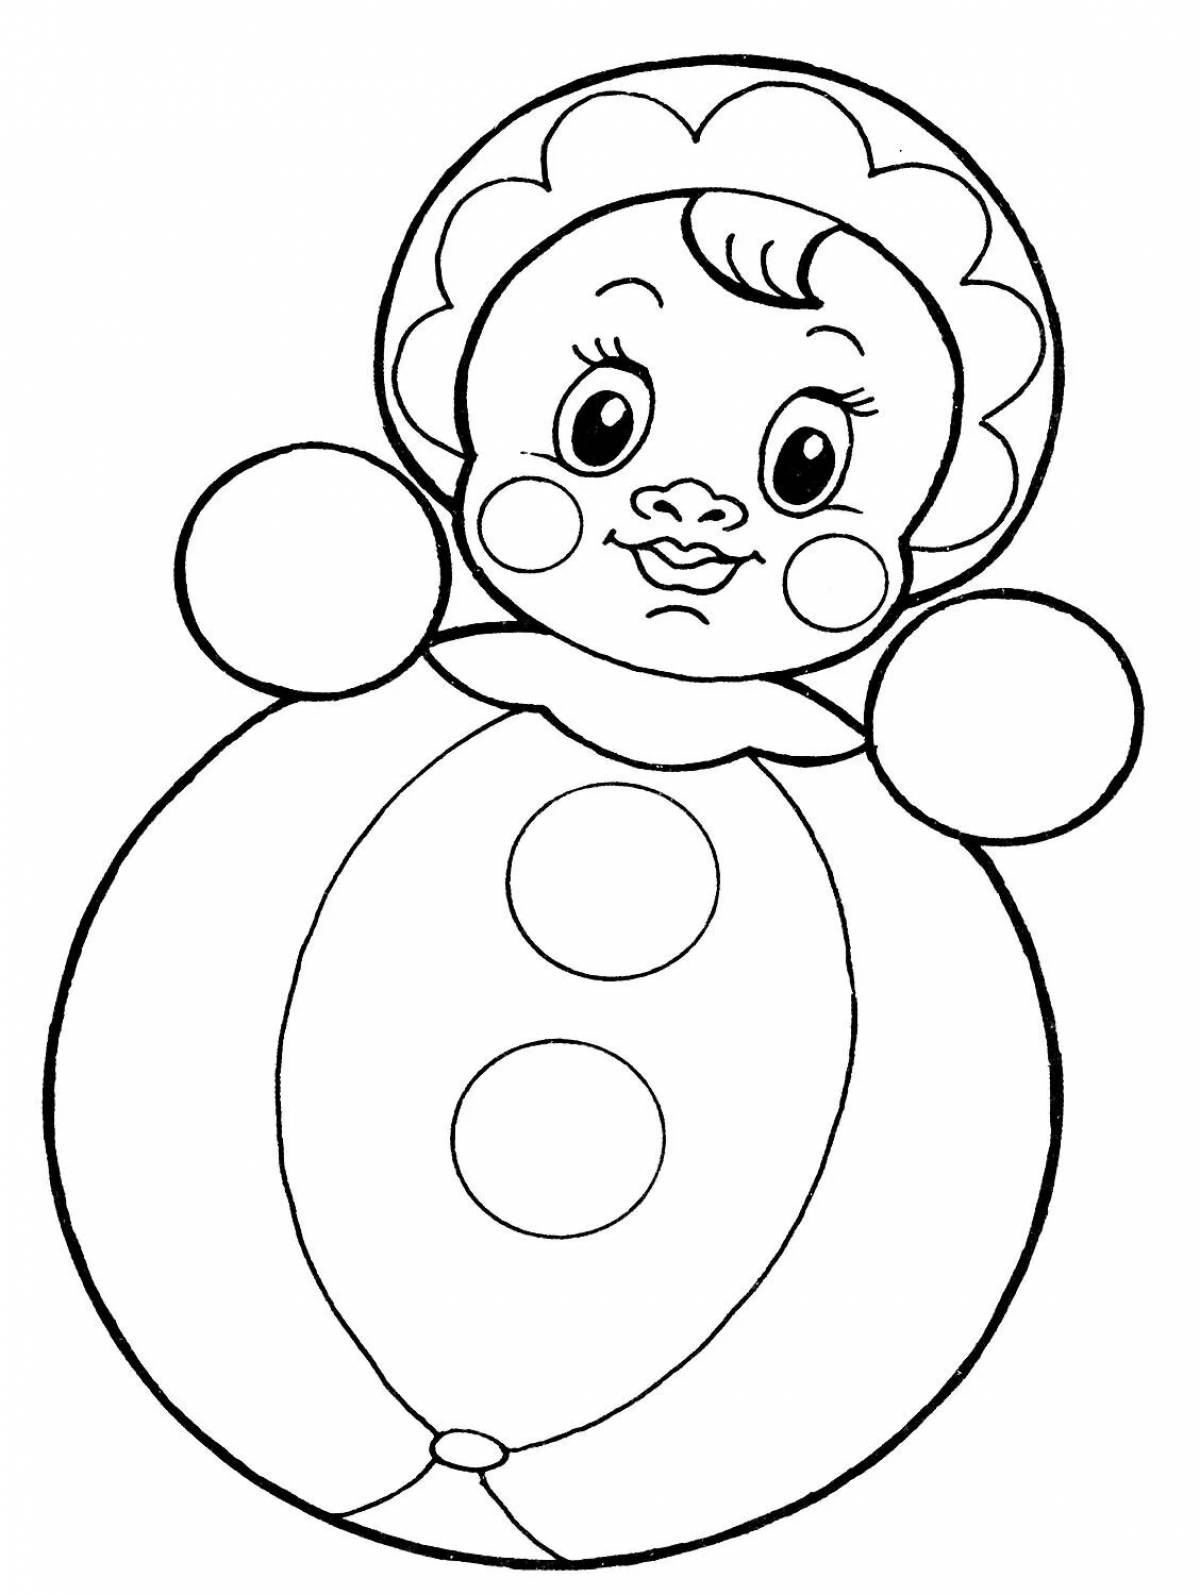 Coloring page playtime tumbler for toddlers